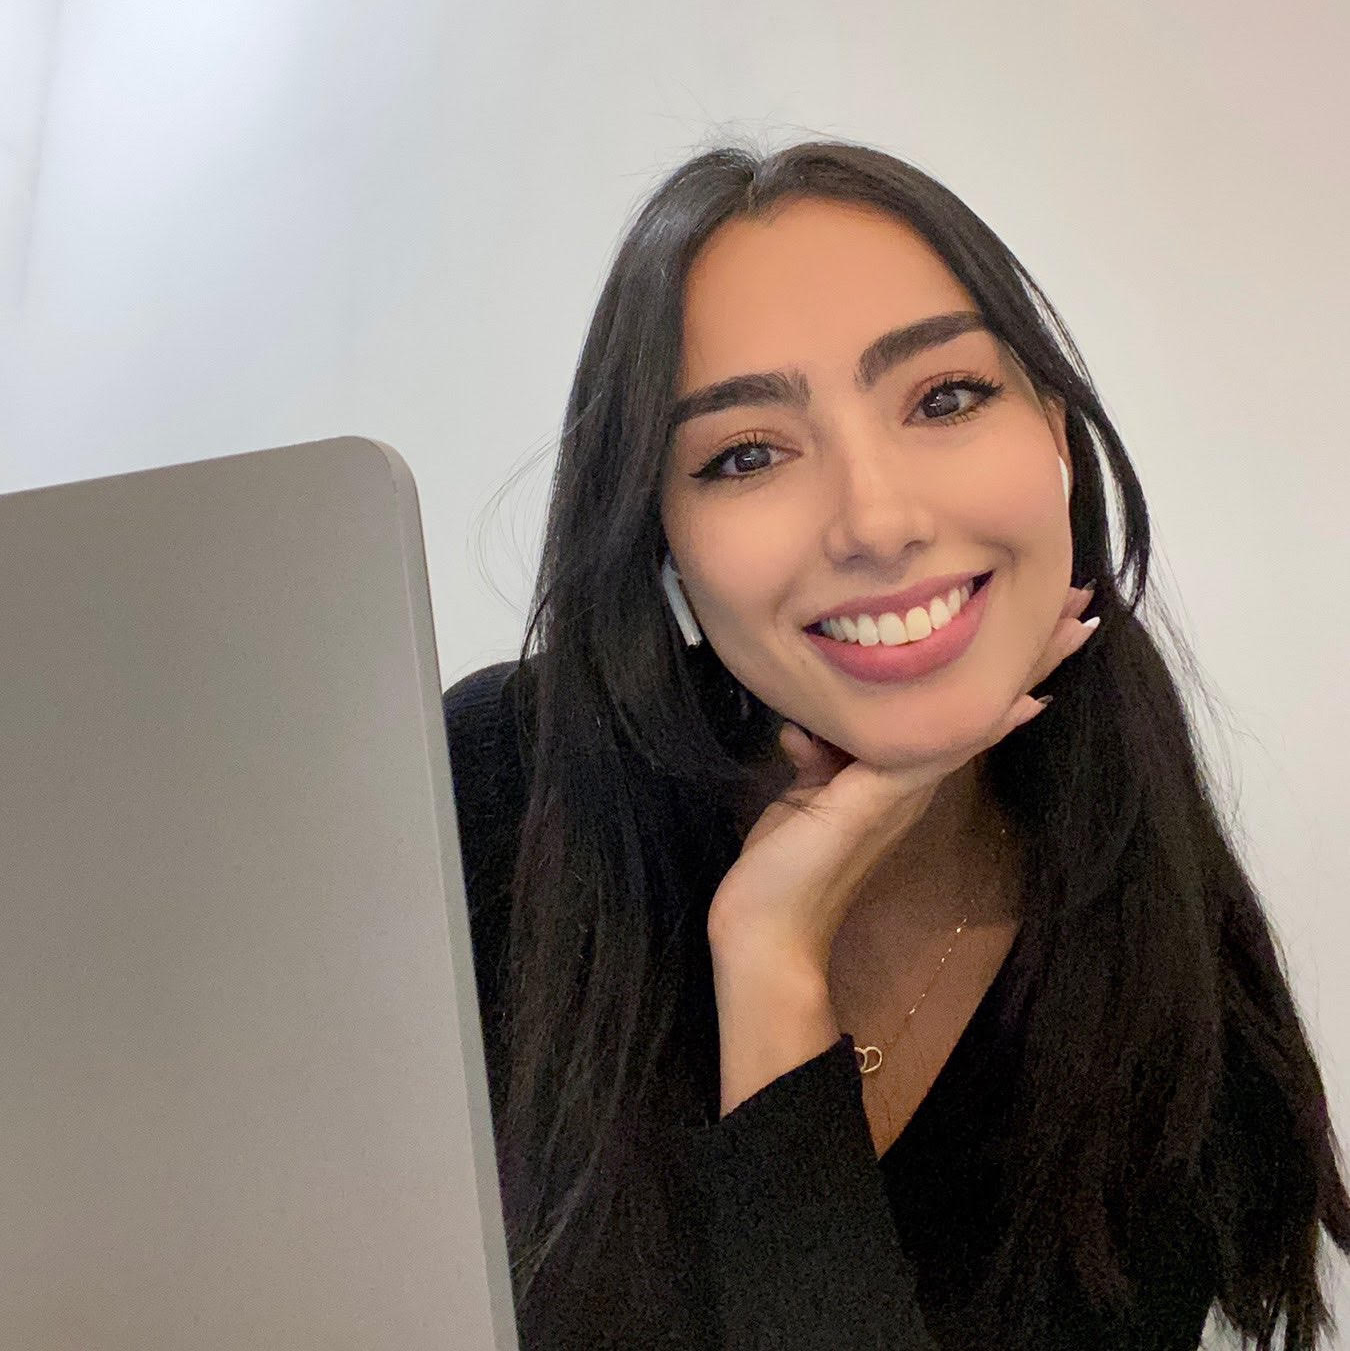 Smiling Ale in front of her laptop